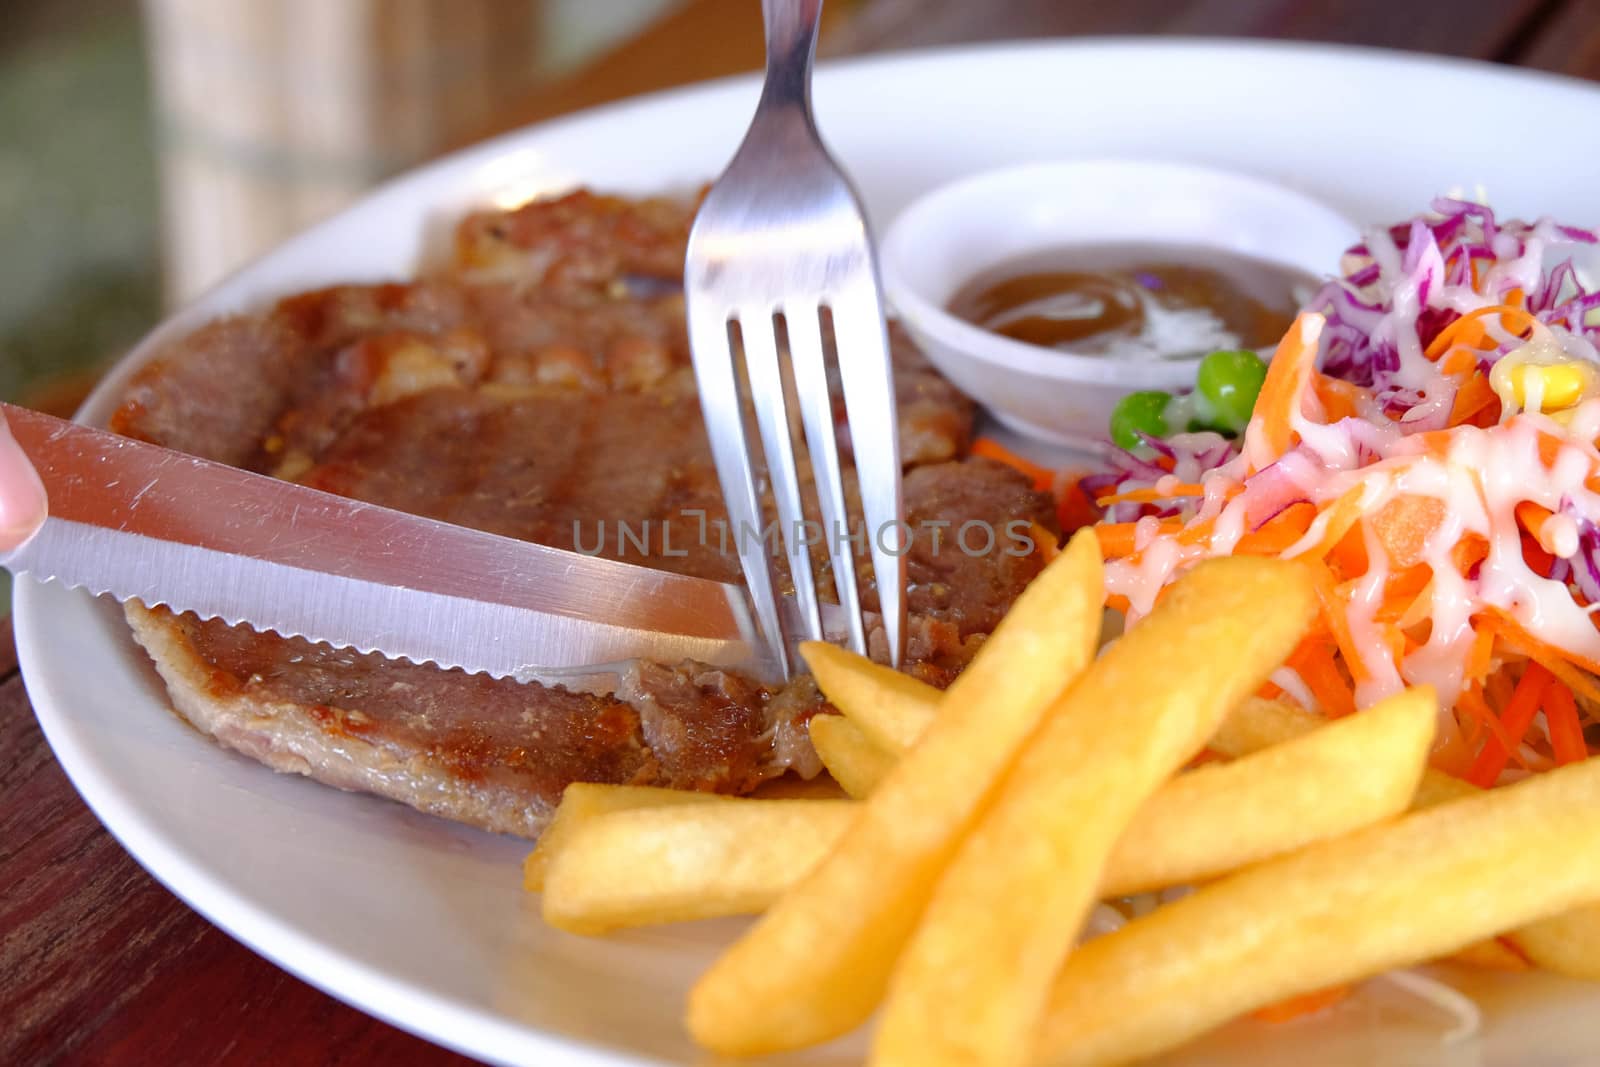 Close up of a cutting a fillet steak with french fries and veget by e22xua